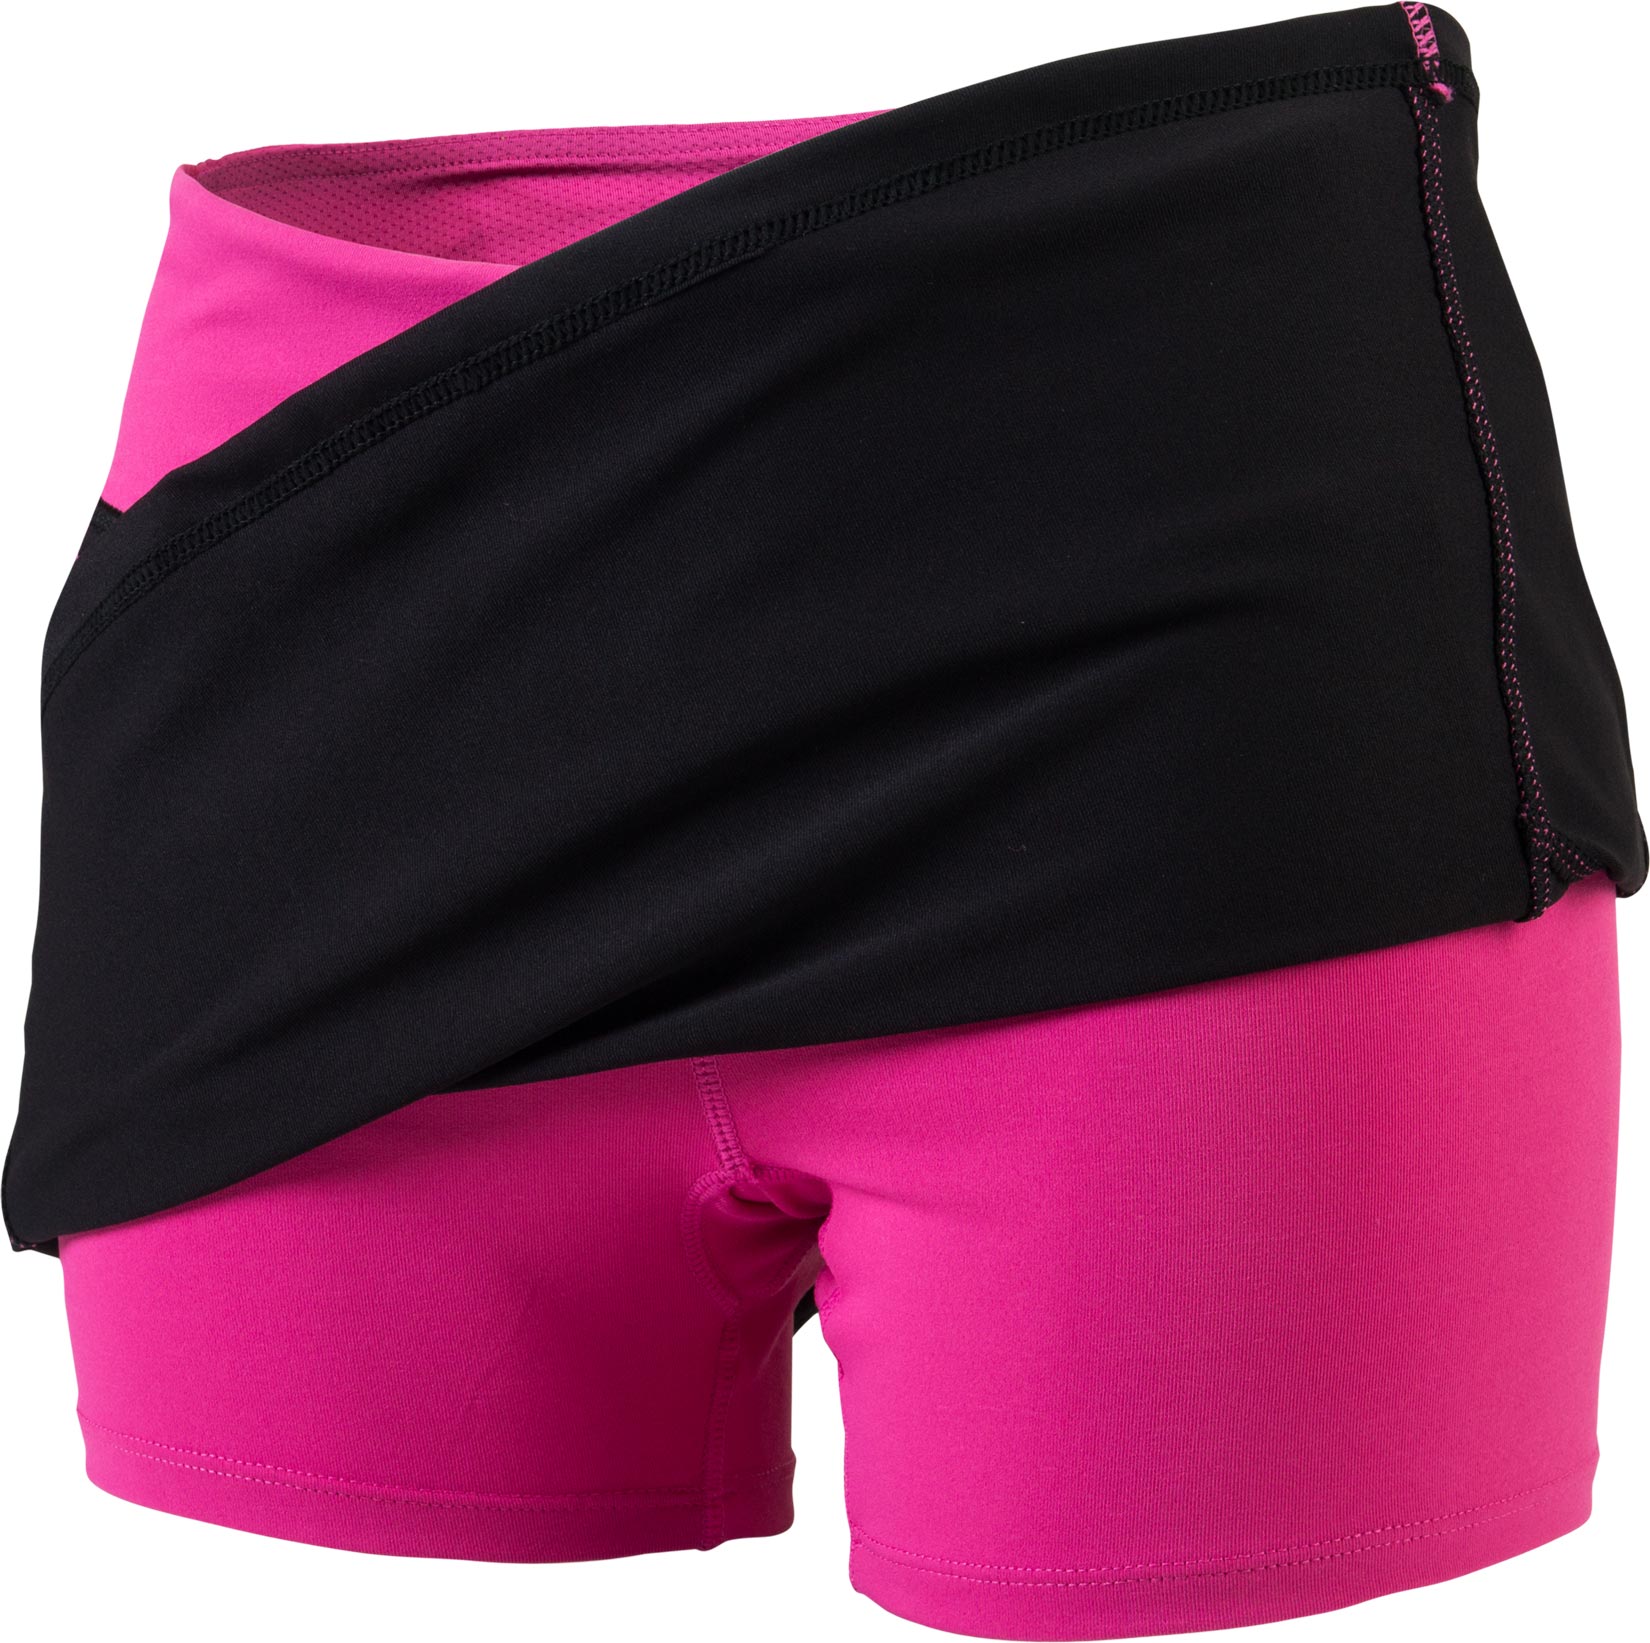 Sports skirt with built-in boxers